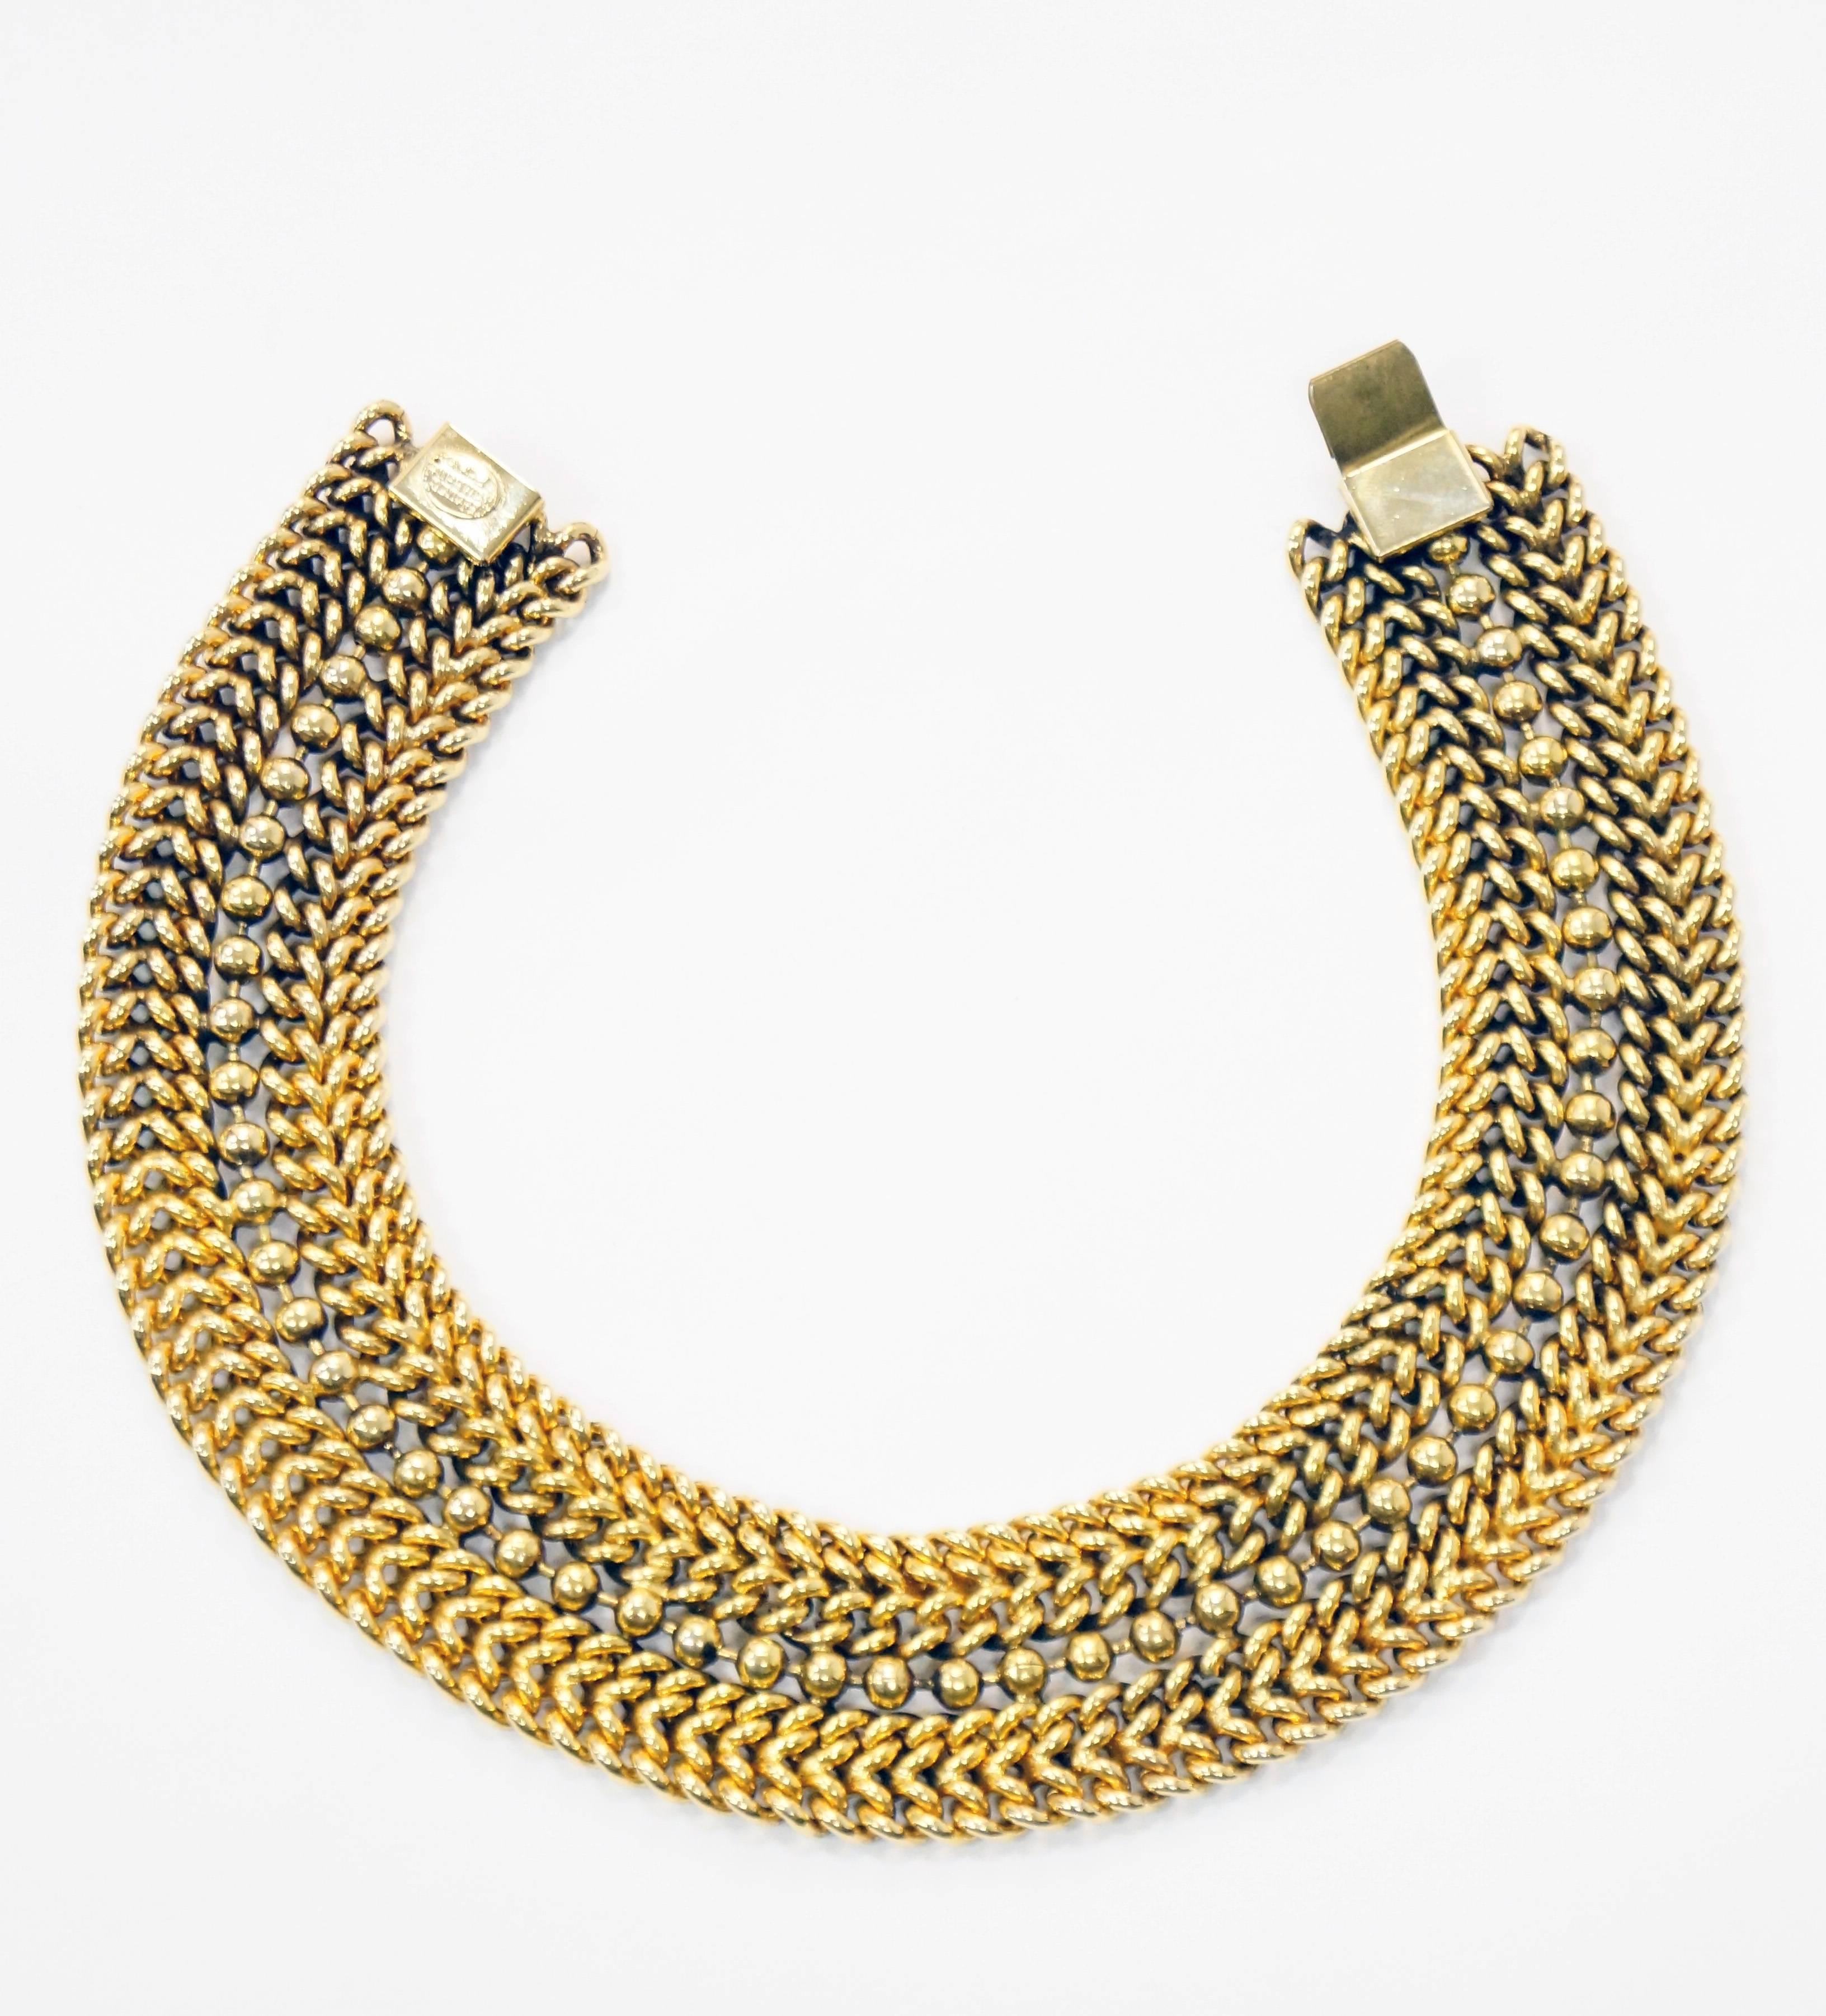 
This 1980s gold tone choker by Edouard Rambaud is absolutely fantastic! The choker is composed of a ball chain in the center of four rows of curb chains. The curb chains are fused together, making the necklace considerably dense, adding to its